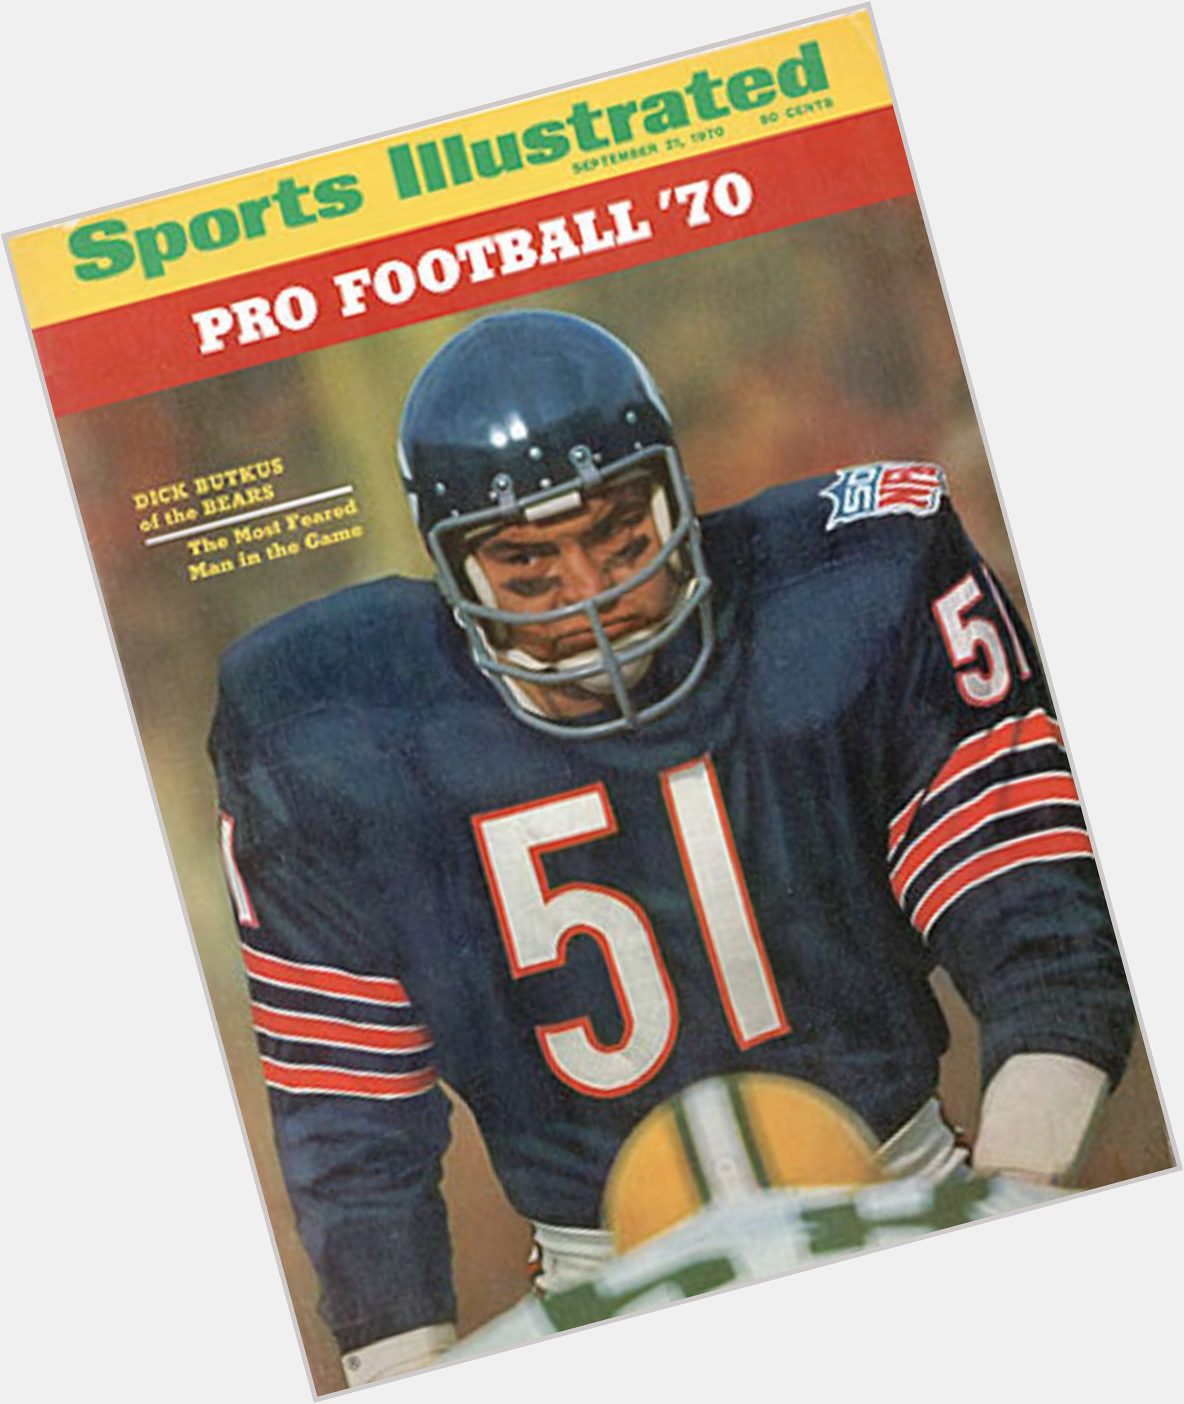 Happy birthday to Dick Butkus.

78 in years, but forever 51. 